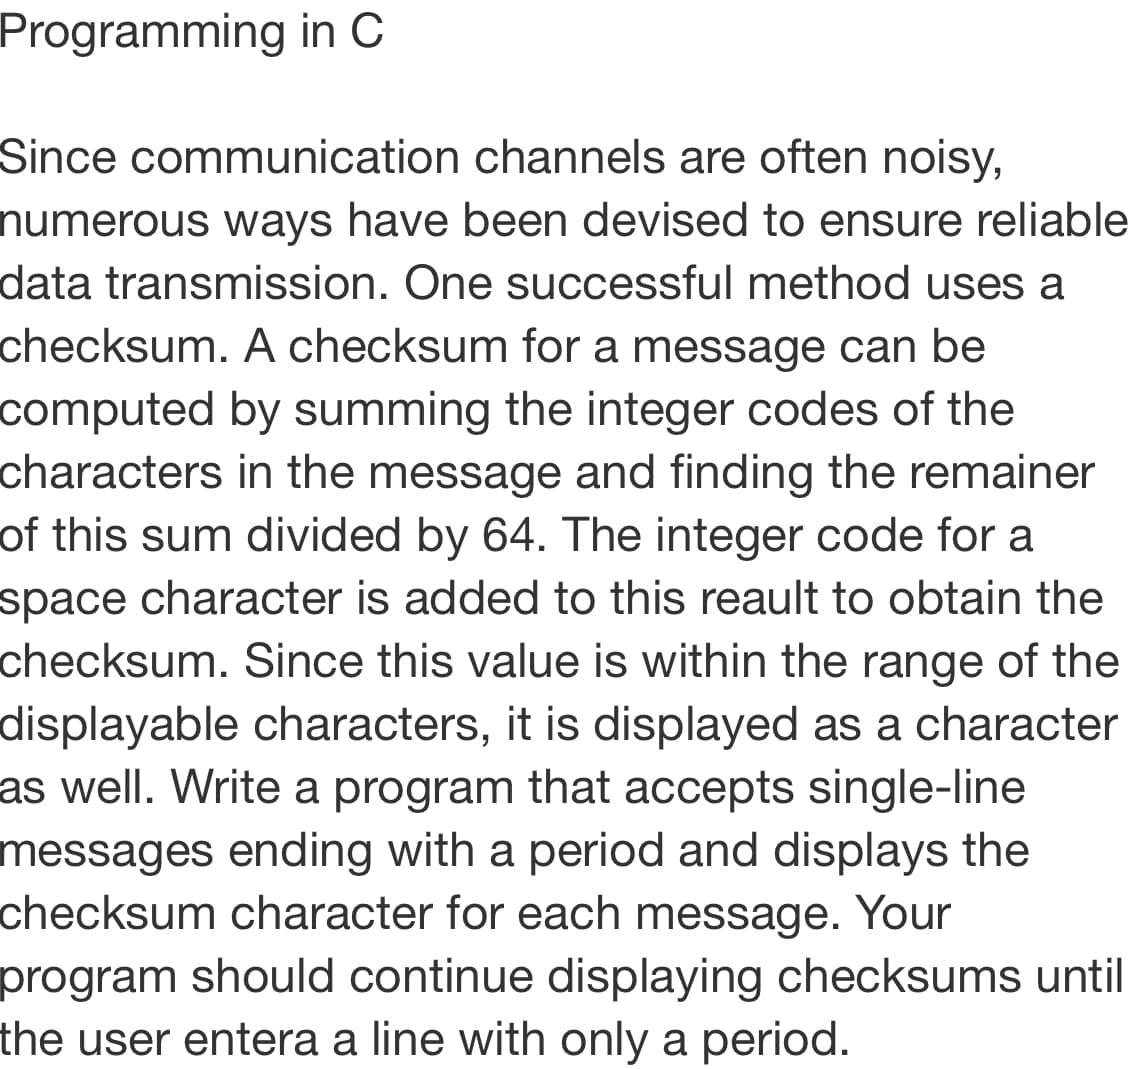 Programming in C
Since communication channels are often noisy,
numerous ways have been devised to ensure reliable
data transmission. One successful method uses a
checksum. A checksum for a message can be
computed by summing the integer codes of the
characters in the message and finding the remainer
of this sum divided by 64. The integer code for a
space character is added to this reault to obtain the
checksum. Since this value is within the range of the
displayable characters, it is displayed as a character
as well. Write a program that accepts single-line
messages ending with a period and displays the
checksum character for each message. Your
program should continue displaying checksums until
the user entera a line with only a period.
